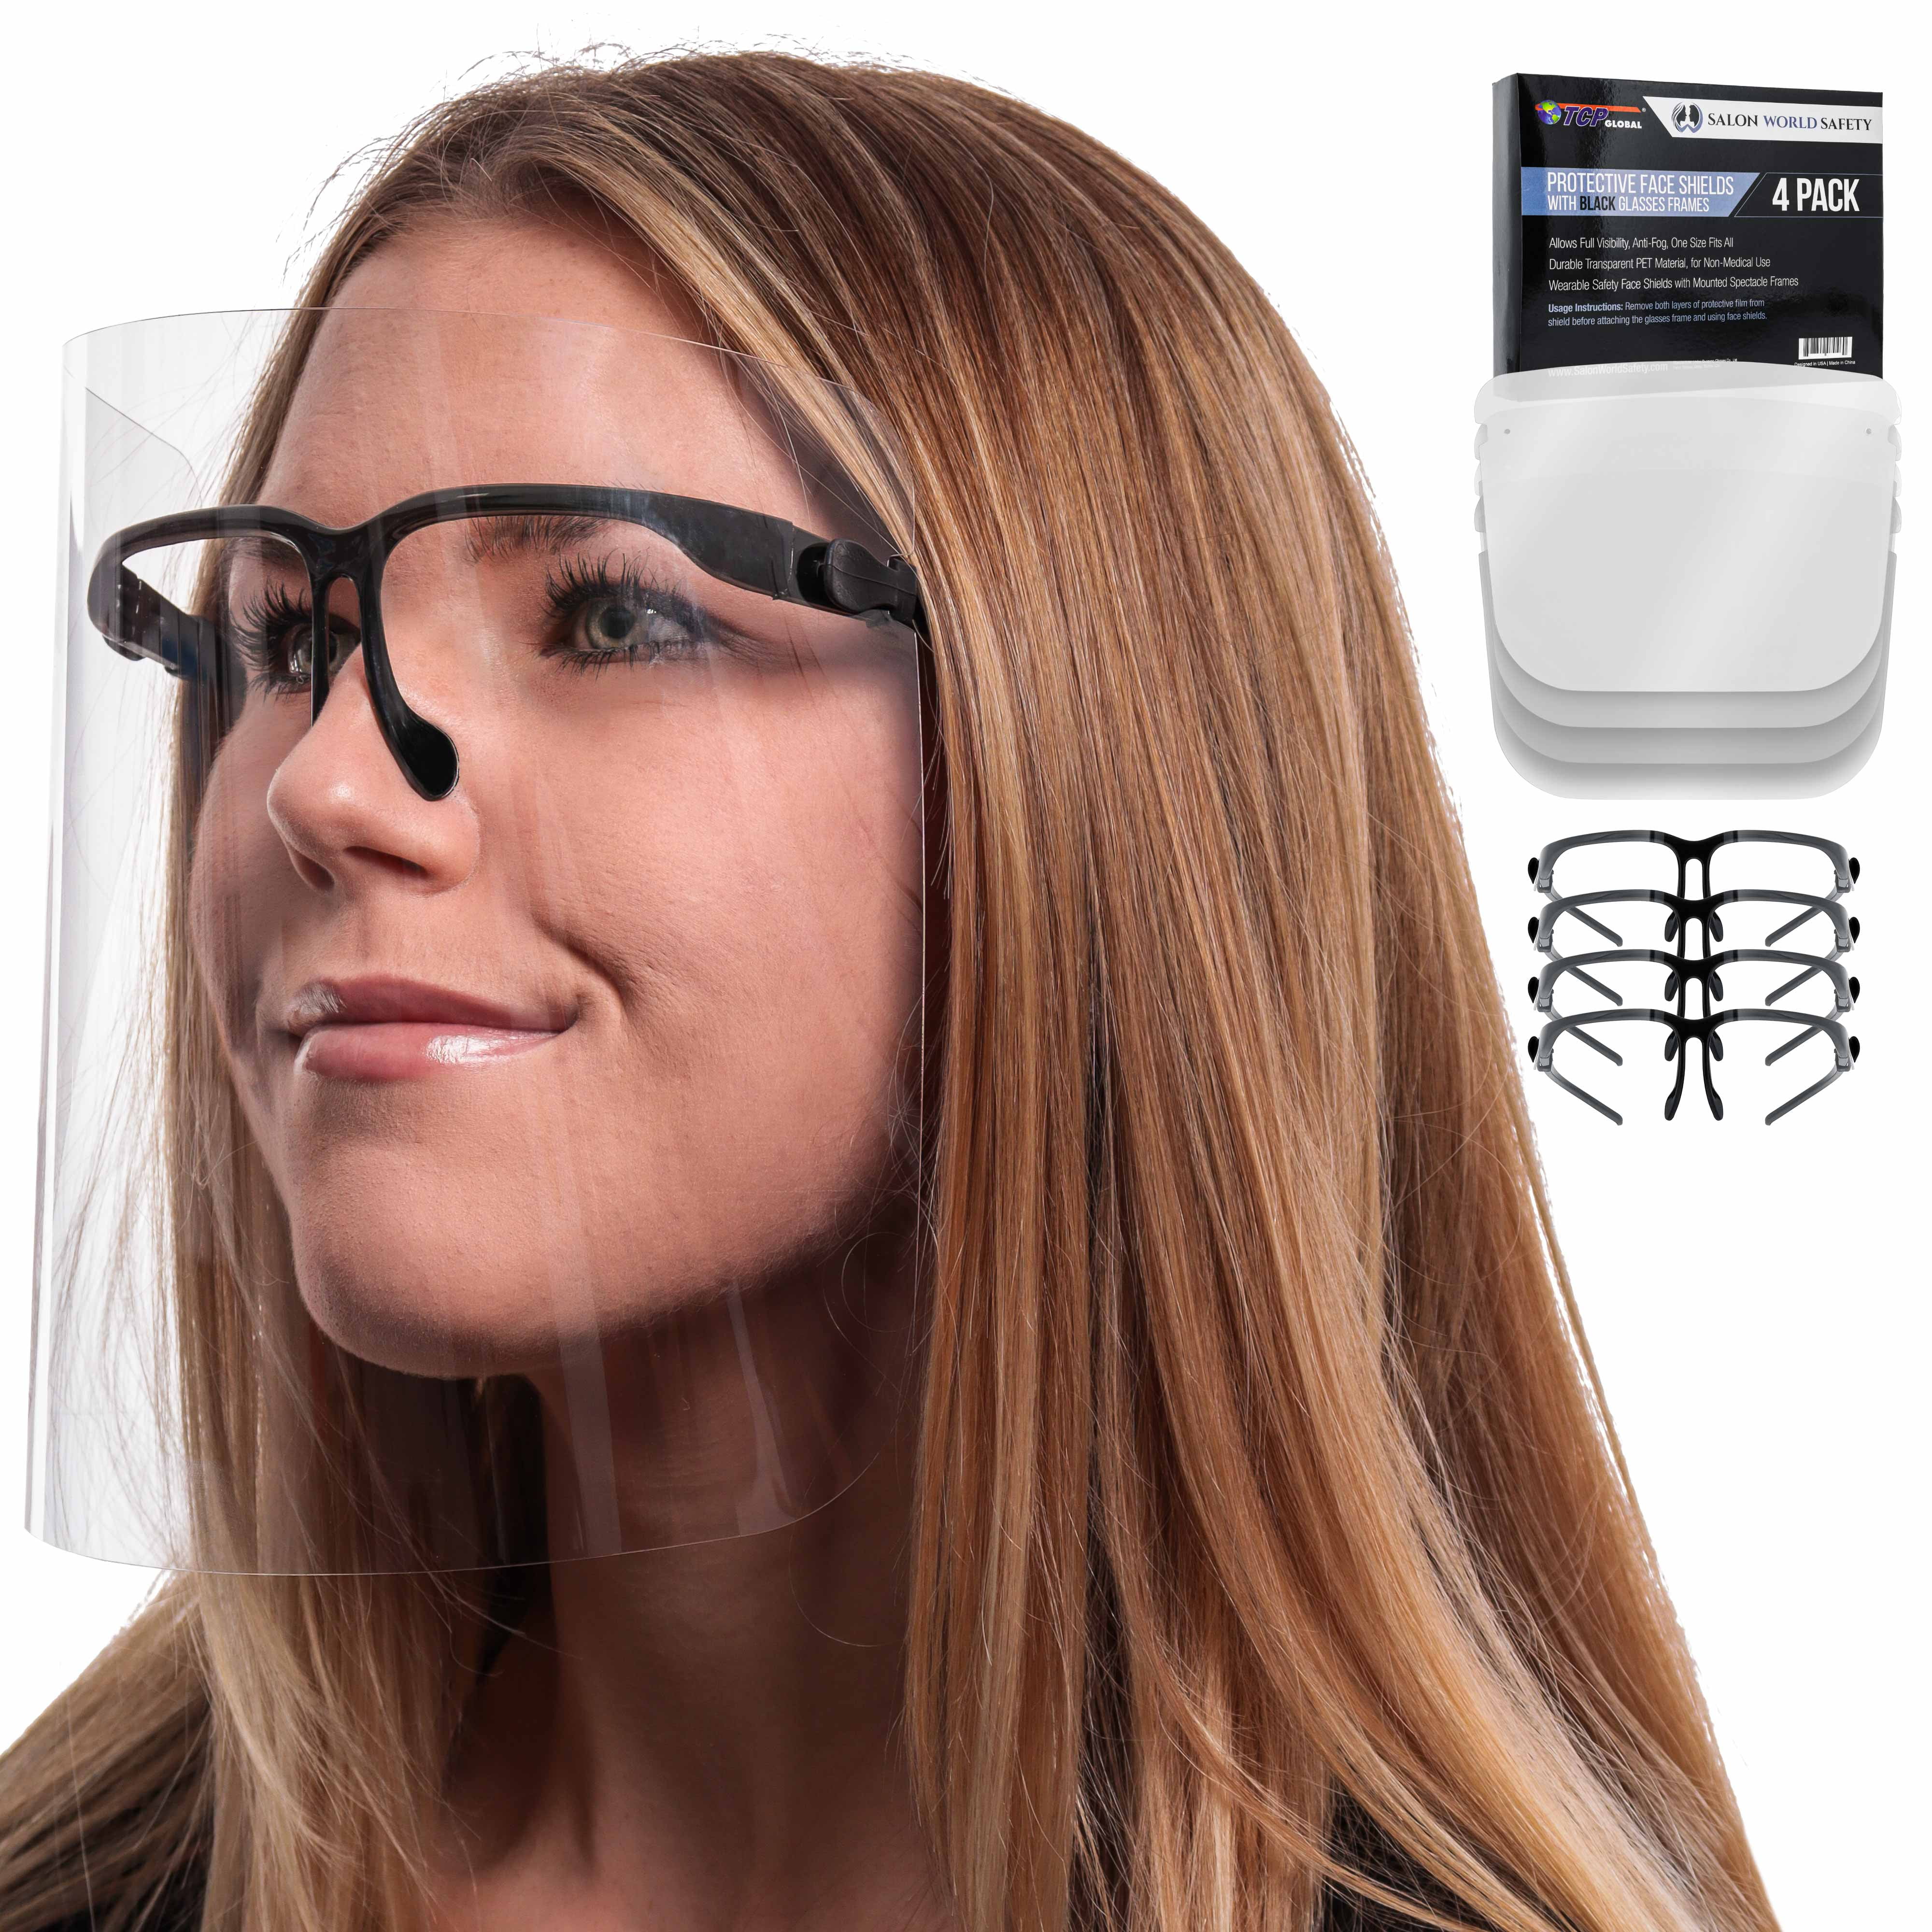 ONE SET  FACE SHIELD  ANTI-FOG INCLUDES ONE PLASTIC SHIELD AND ONE FRAME-LATEST 